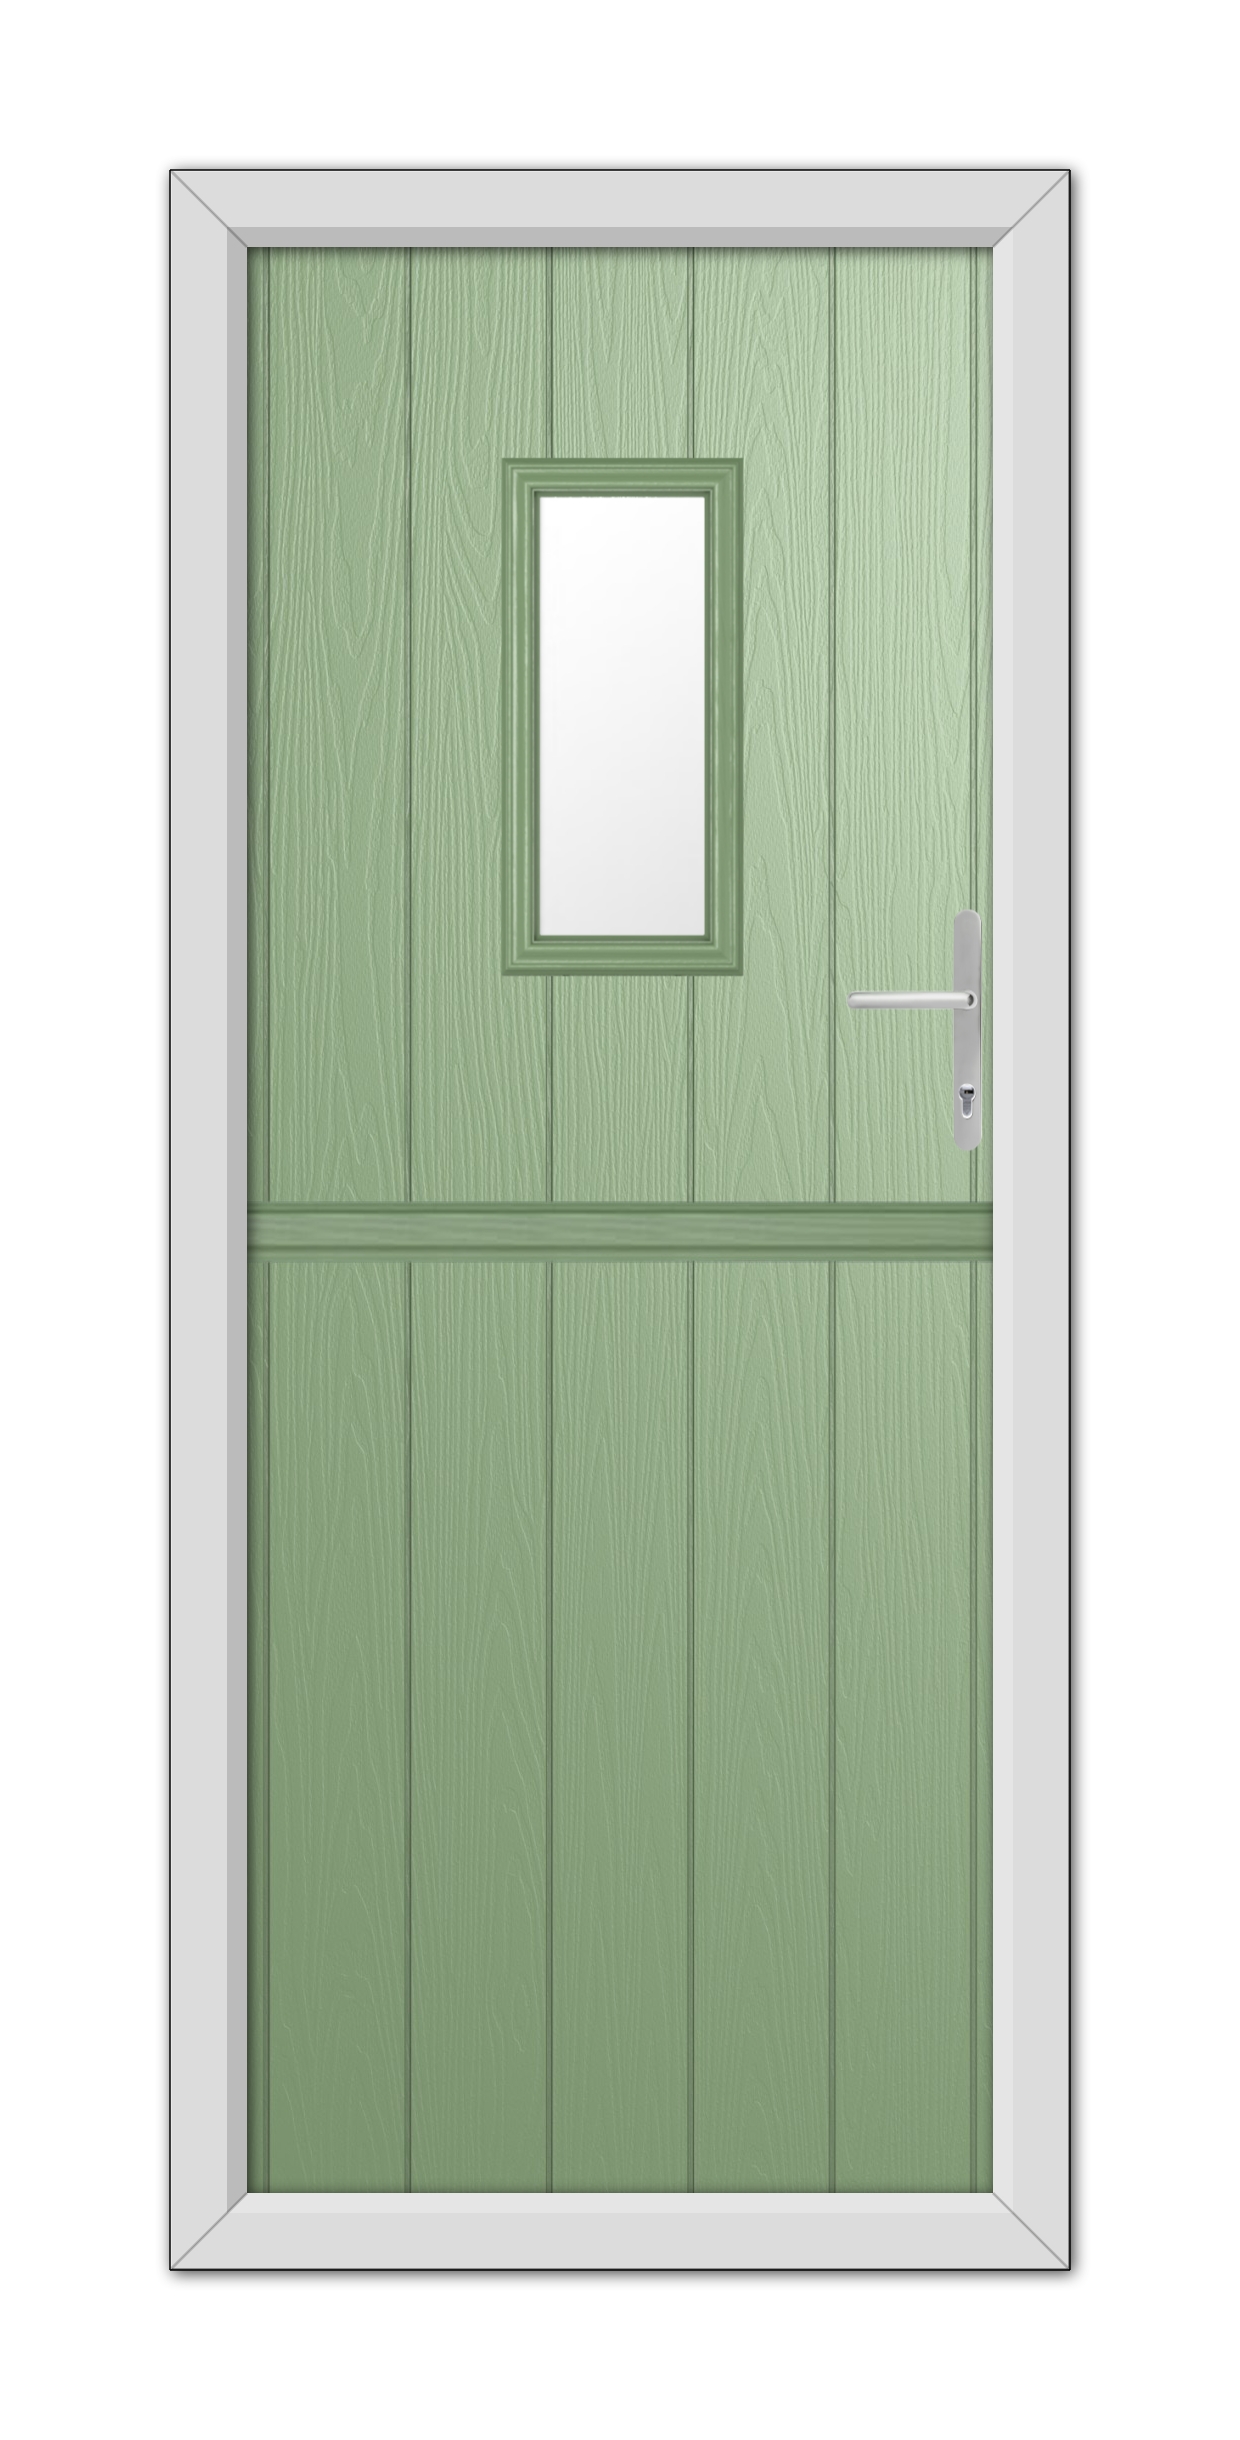 A Chartwell Green Somerset Stable Composite Door 48mm Timber Core with a small square window, fitted within a white frame, featuring a modern handle on the right side.